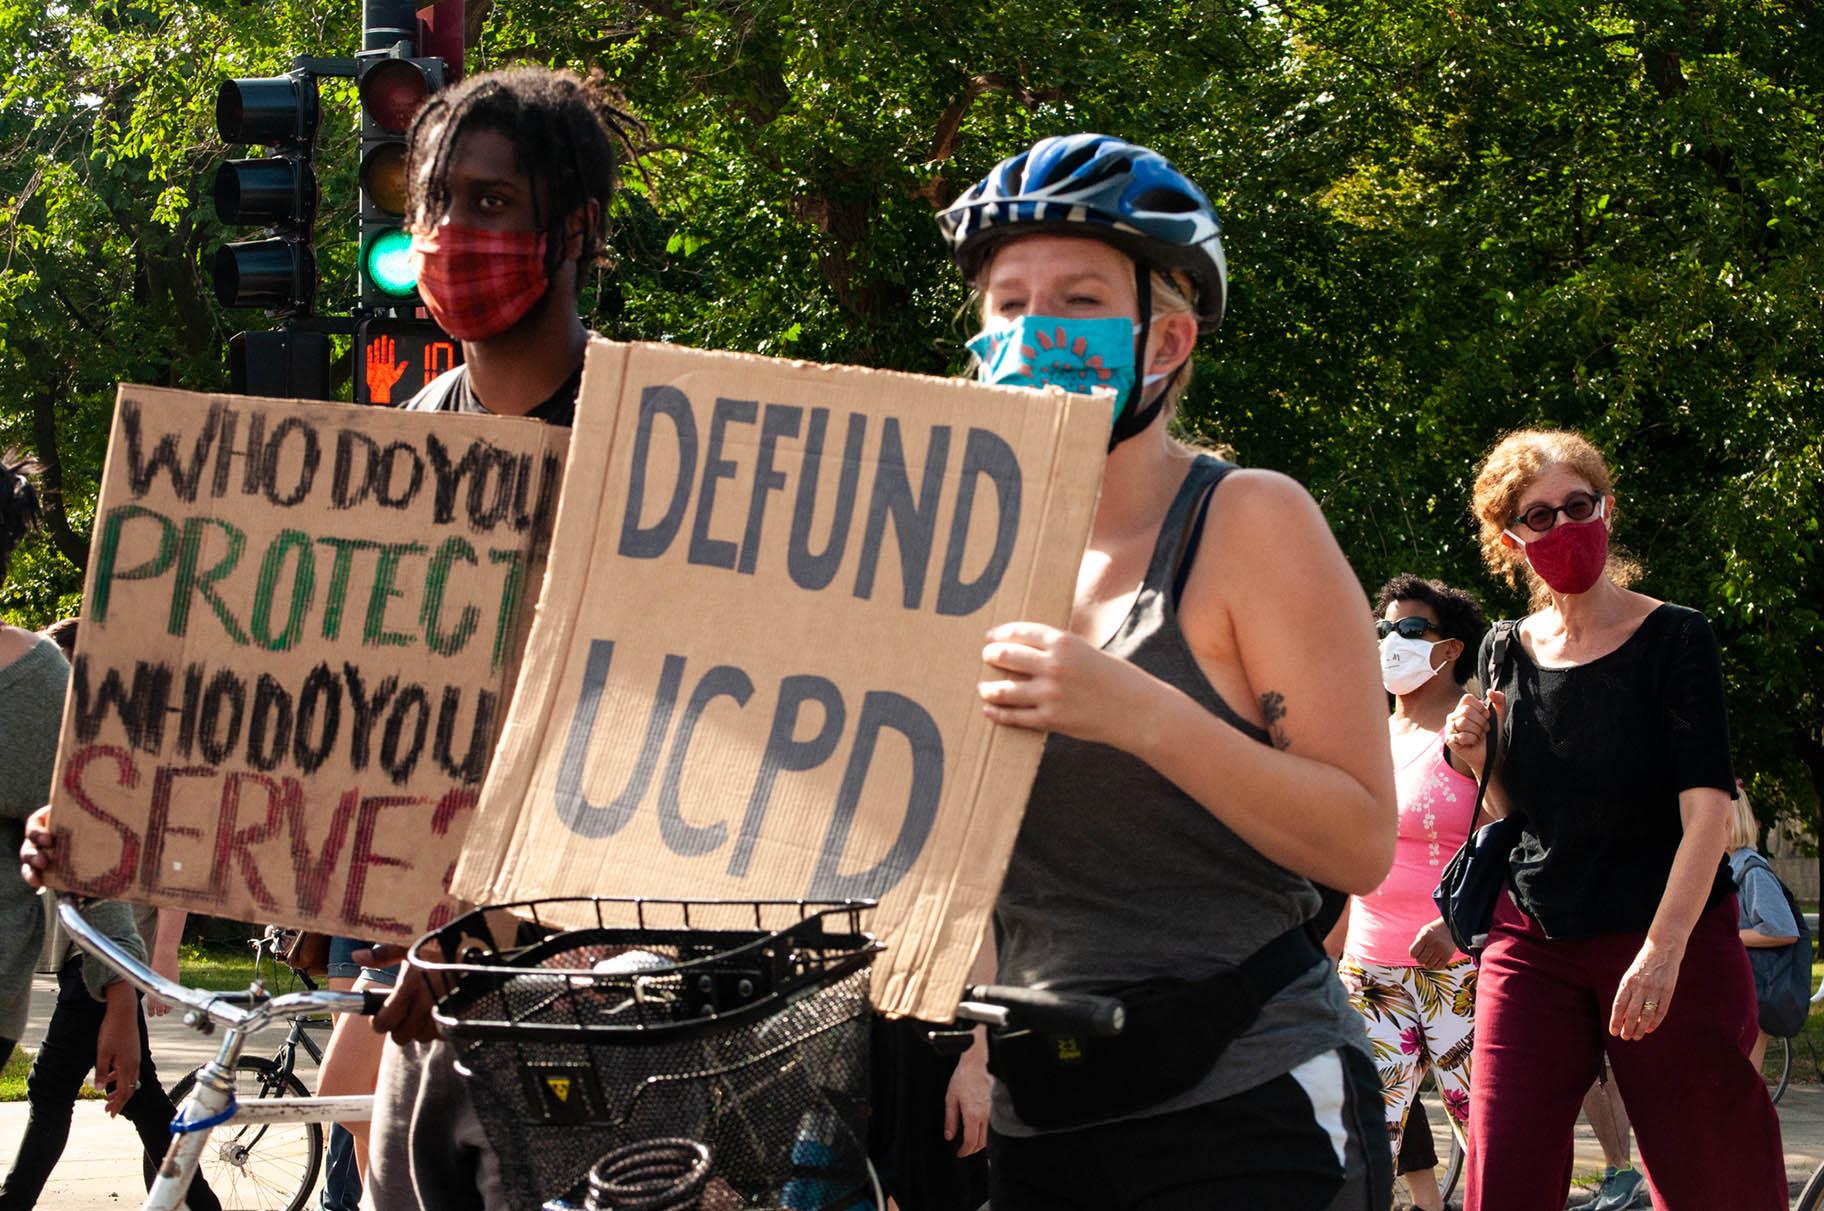 Activists in support of defunding the University of Chicago Police Department participate in a march on Saturday, Aug. 29, 2020. (Grace Del Vecchio / WTTW News)